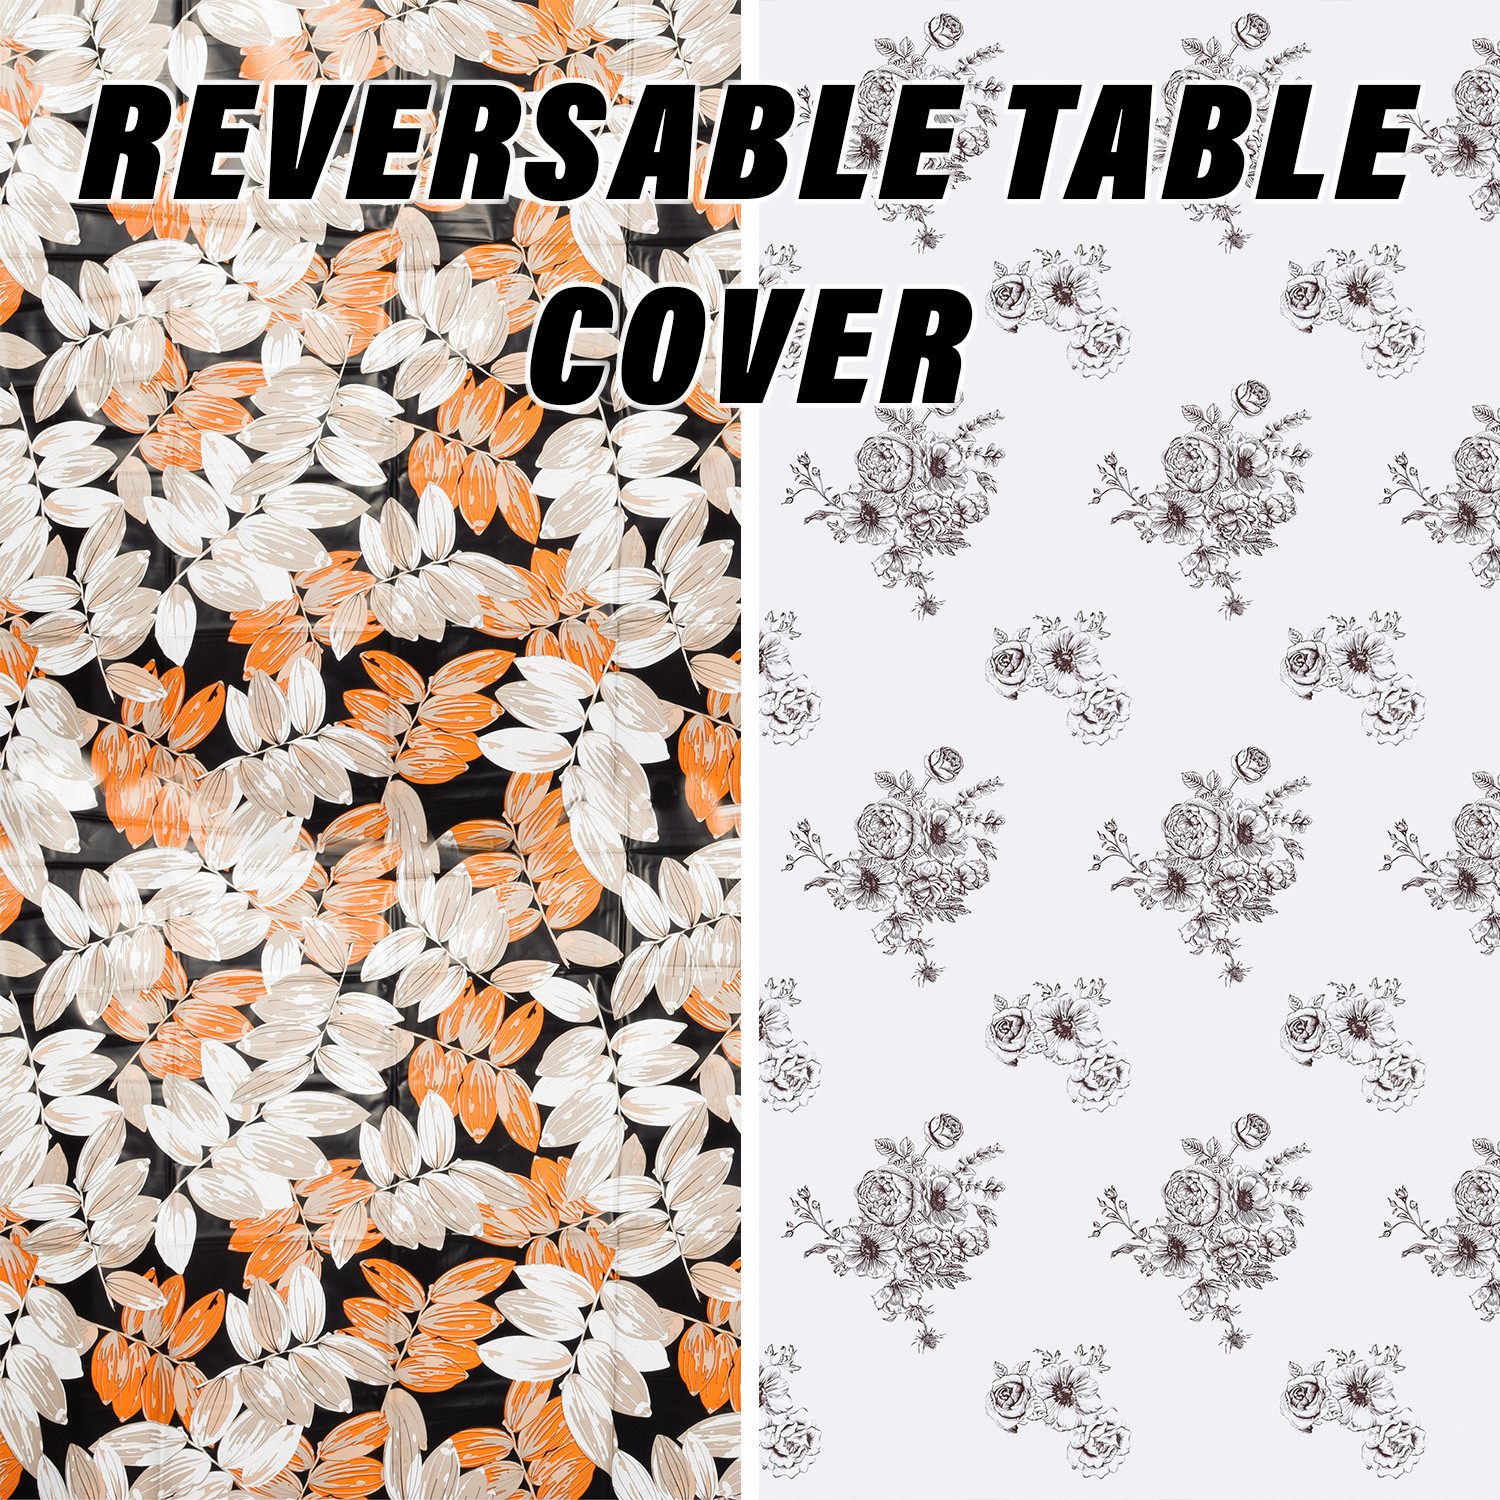 Kuber Industries Table Cover | Dining Table Cover | Center Table Cover | Reversable Table Cover for Kitchen Table | Leaf Design Table Cover for Hall Décor | 54x54 Inch | Brown